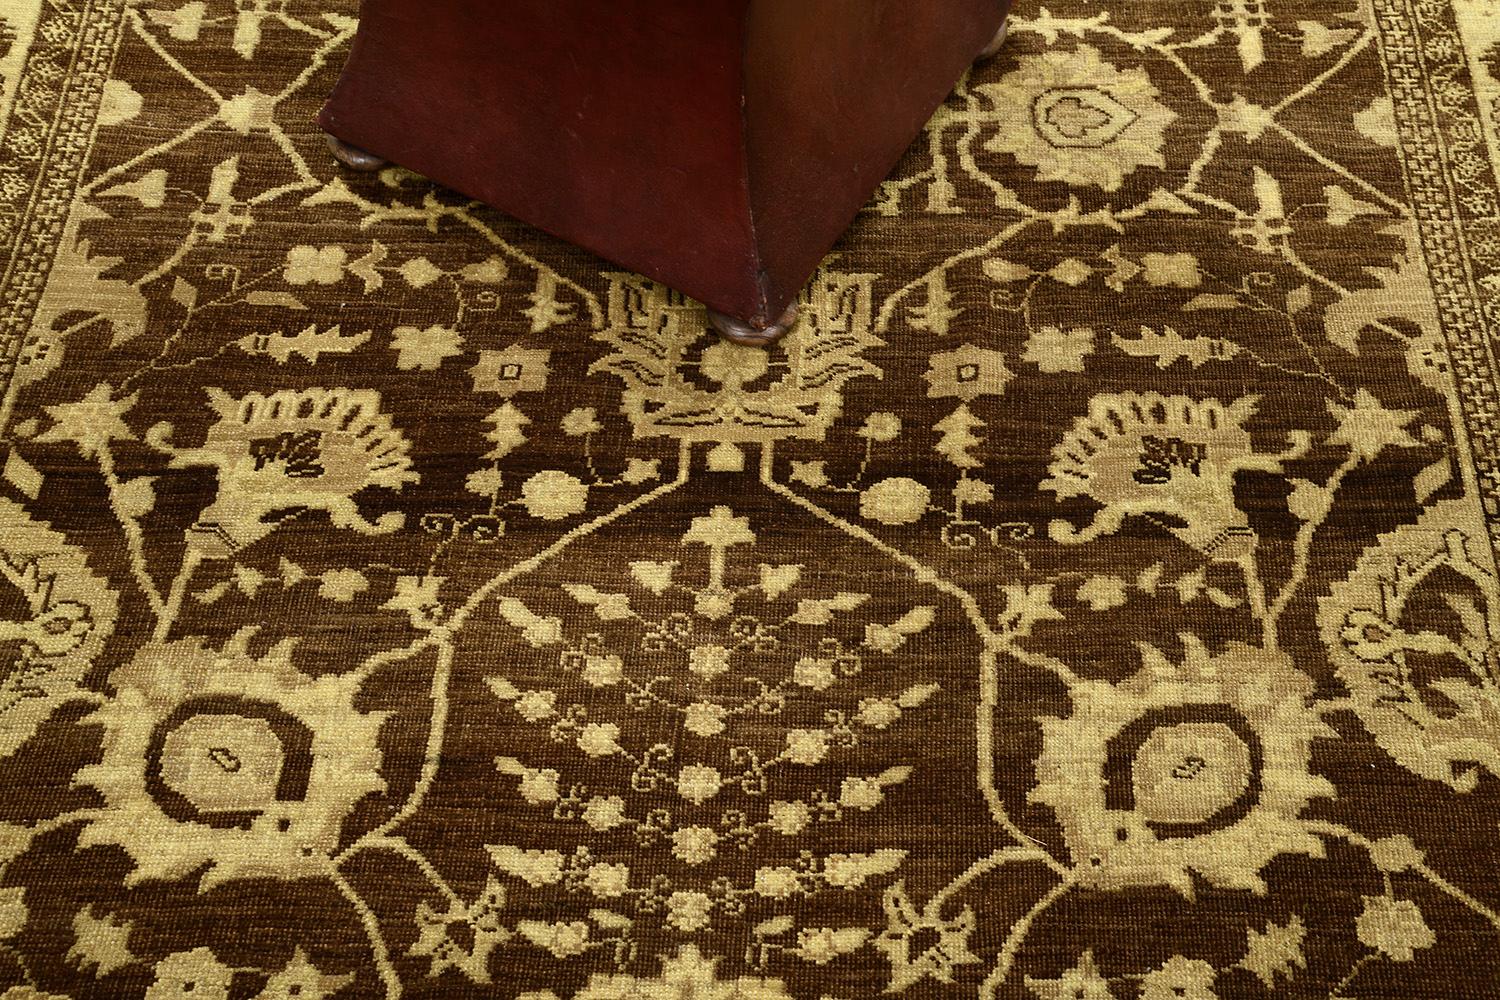 Series of symbolic motifs and ornaments are reflected through dazzling tones of embellishments to telling a historical event in the umber brown field. The borders are beautifully hand-woven that created from a vegetable dye to form an elegant